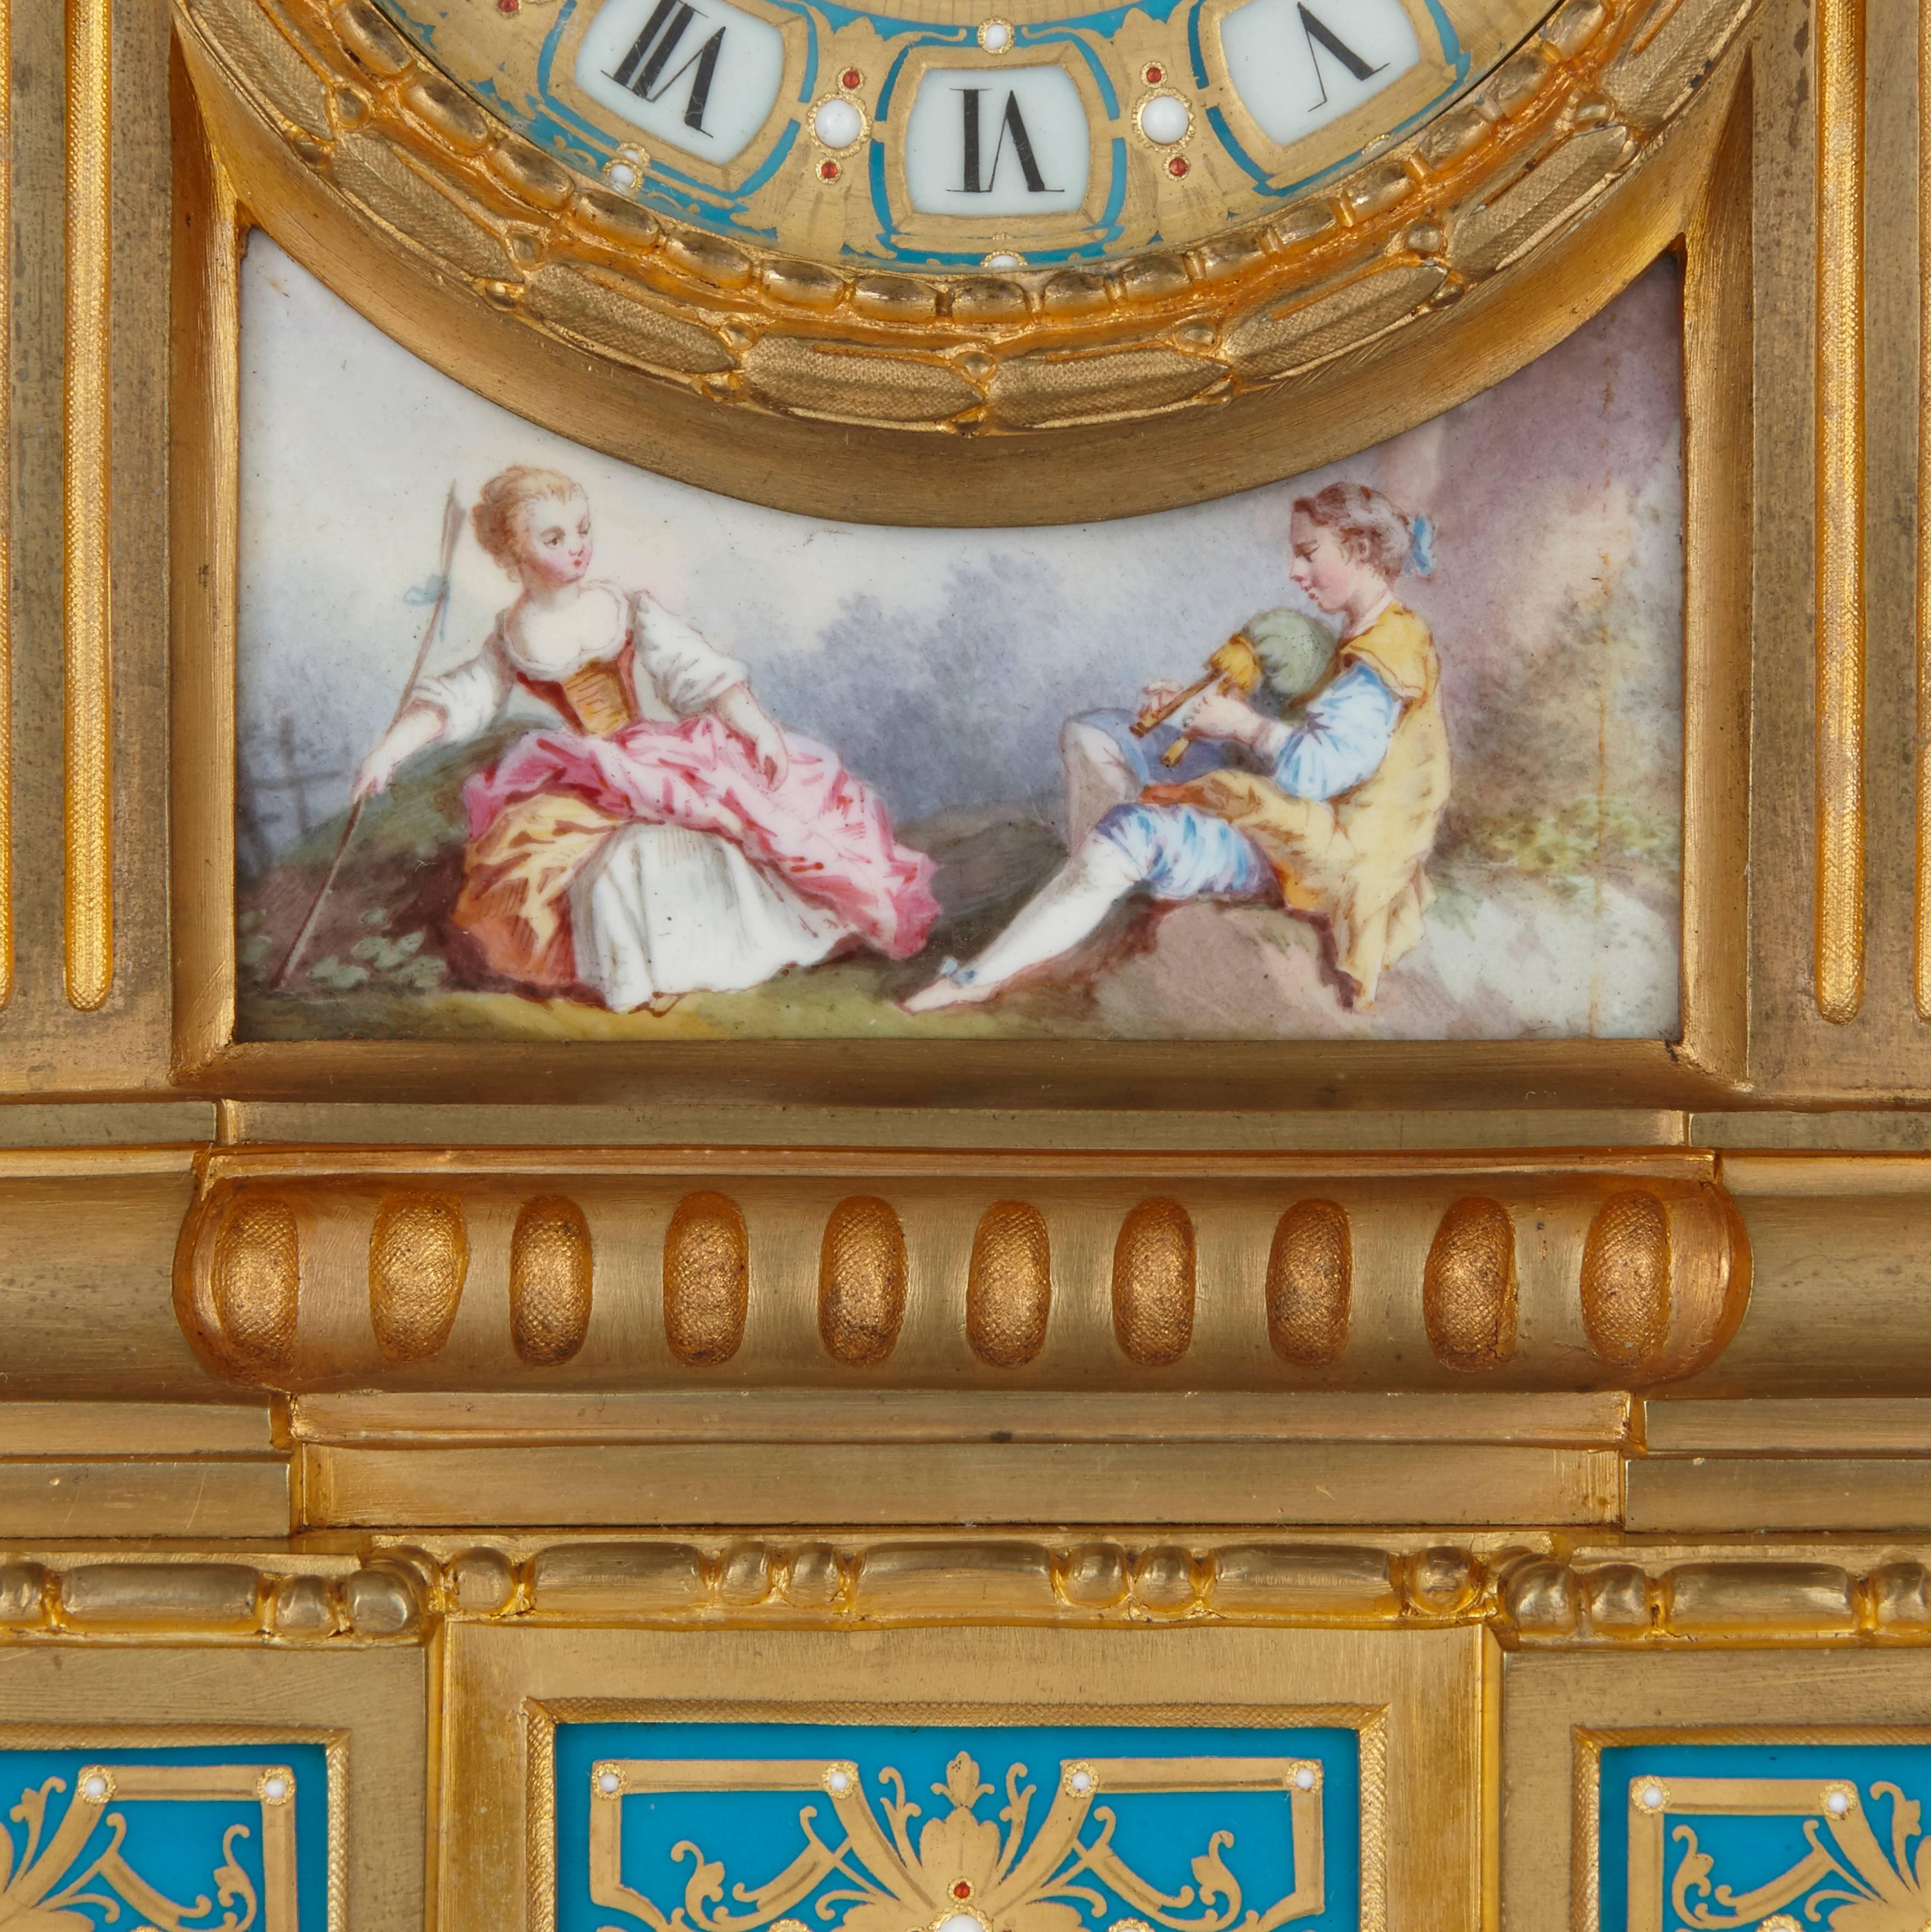 Of porcelain mounted ormolu, the clock's dial marked 'Raingo Fres, Paris', the central clock decorated with a scene of traditional 19th century courtship, the two flanking candelabra depicting cherubs with musical instruments.

Clock